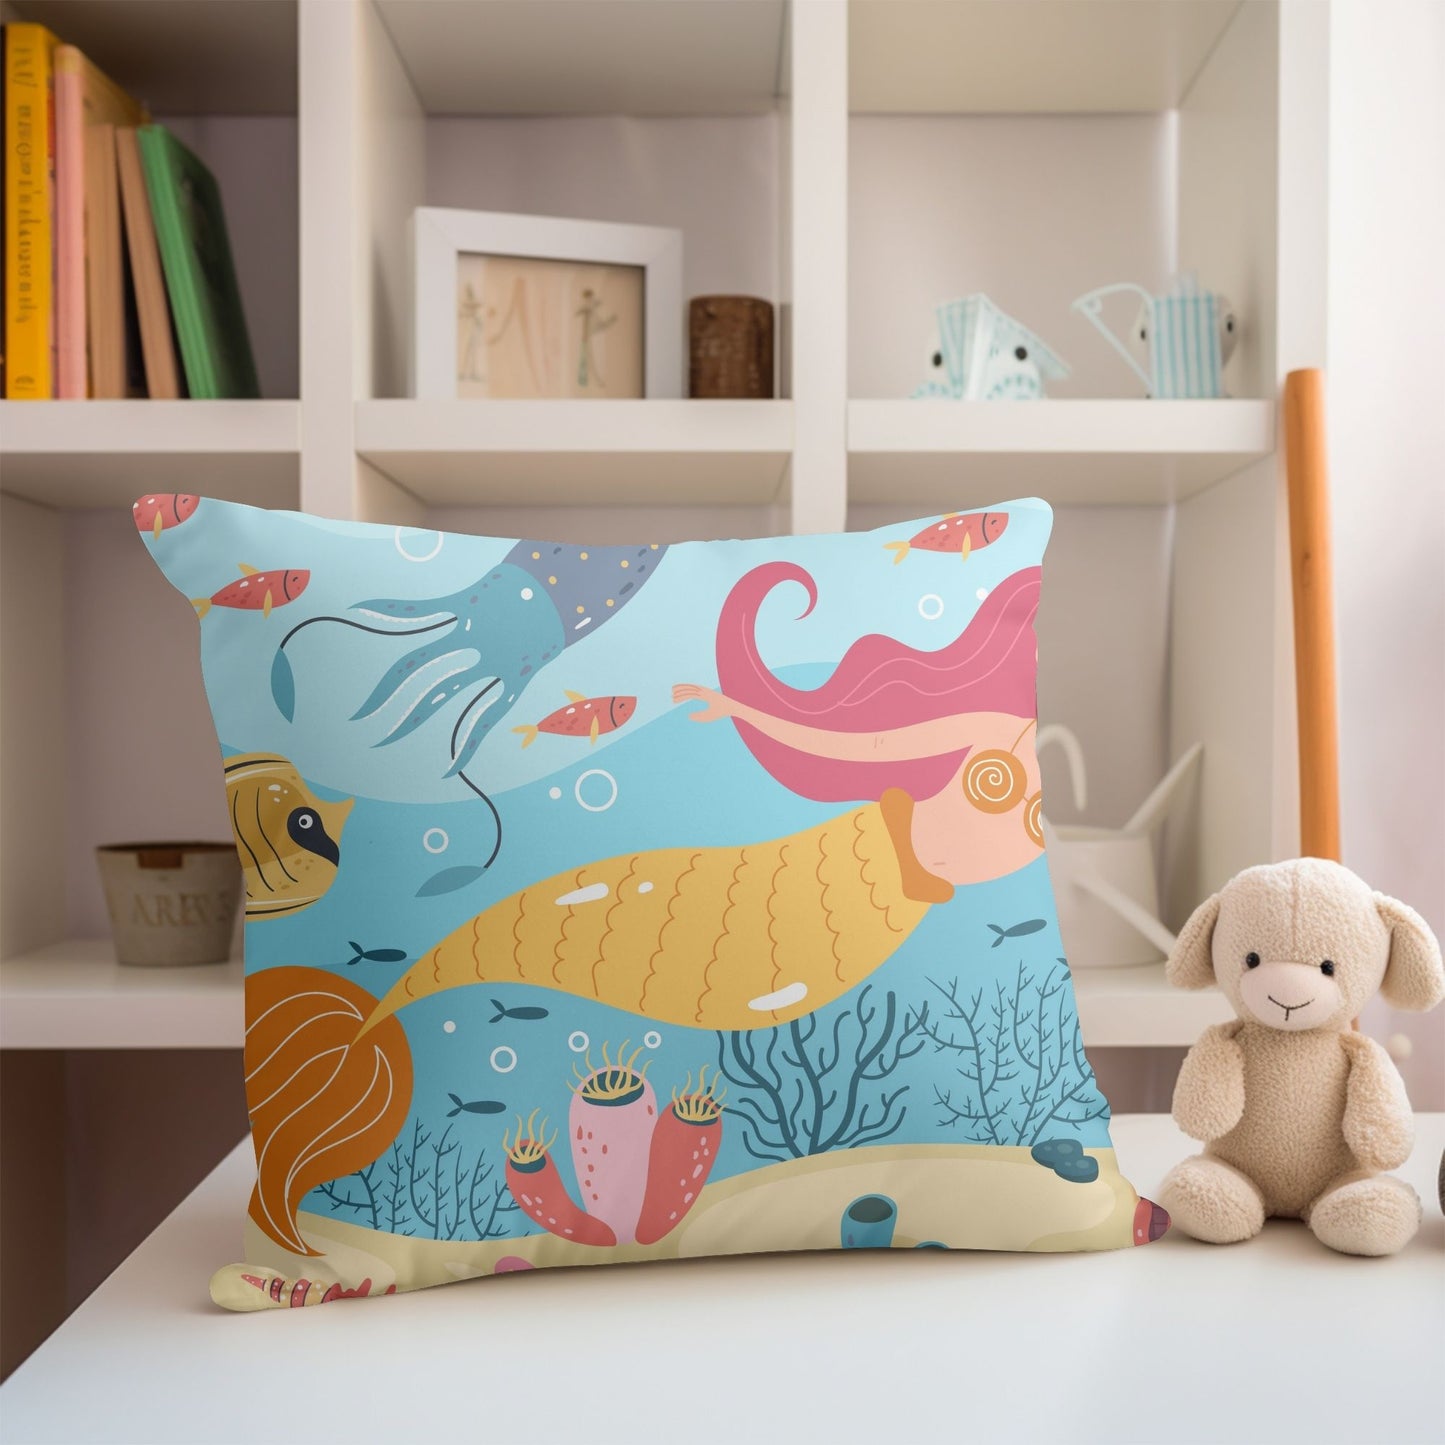 Cozy mermaid-themed pillow designed for baby's room decor.